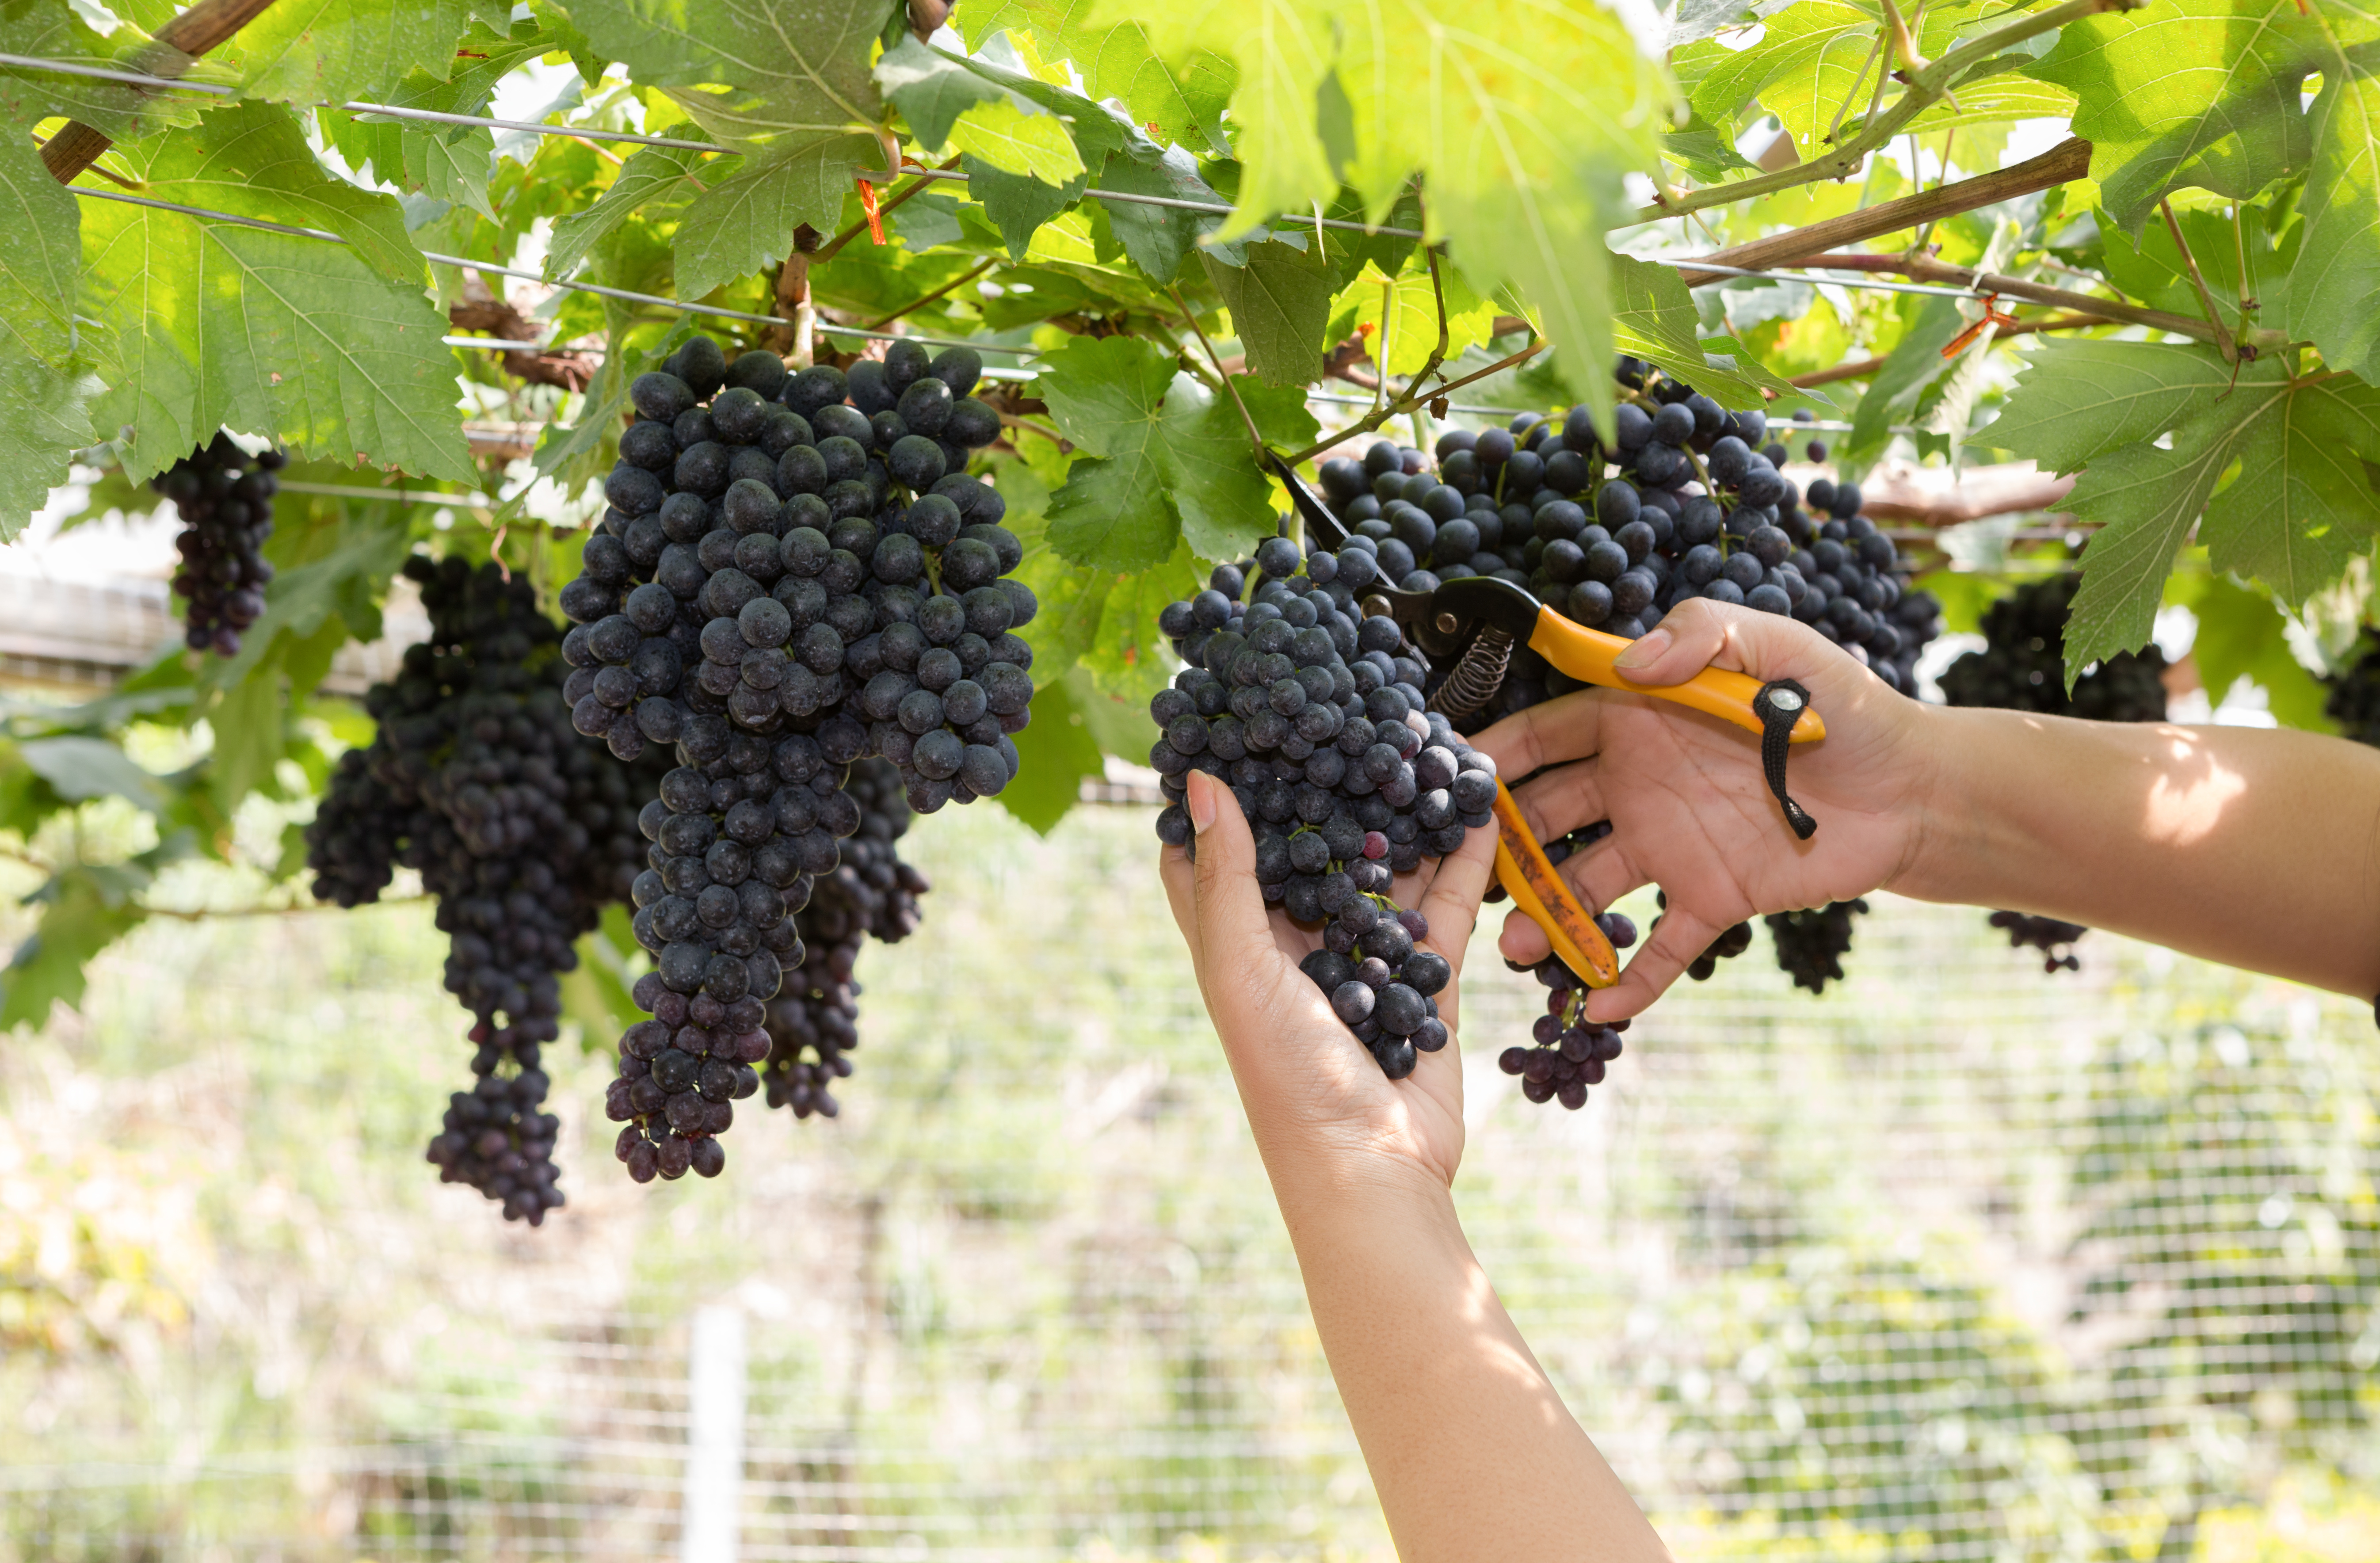 A person harvesting a whole cluster of wine grape bunch from a vine